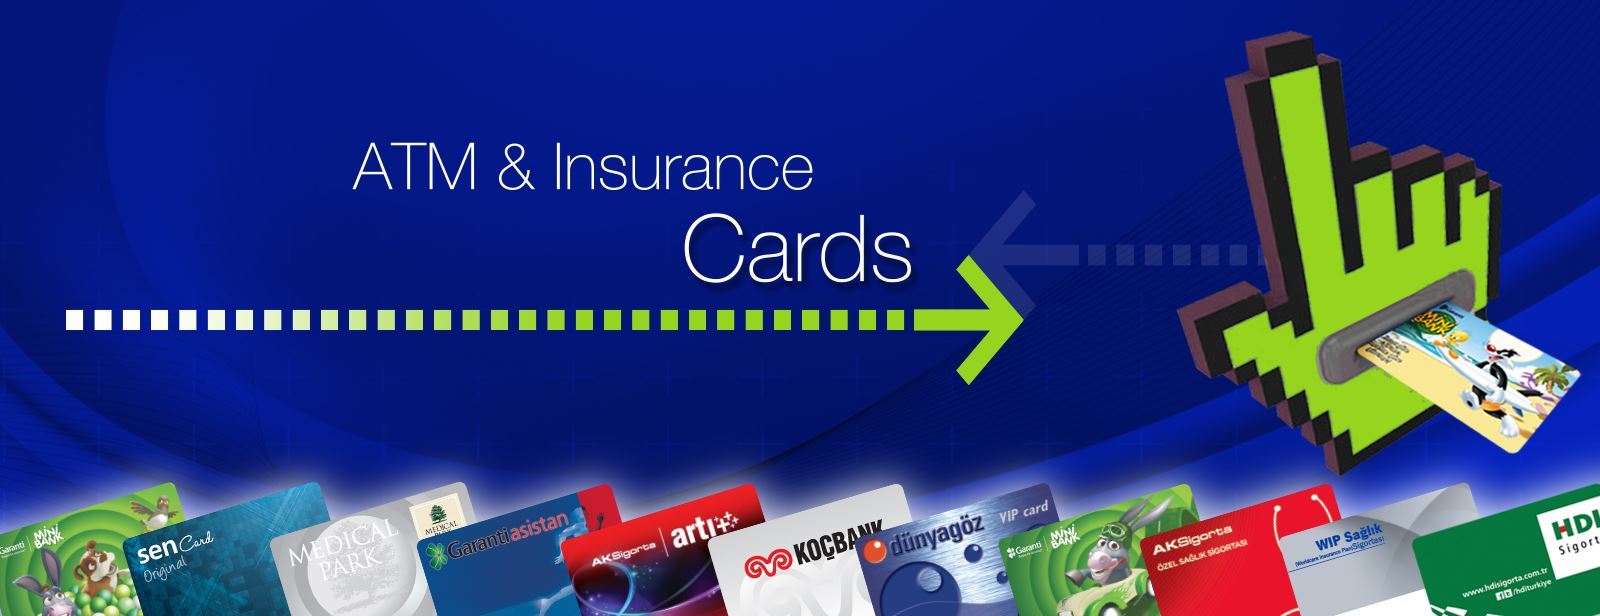 ATM & Insurance Cards